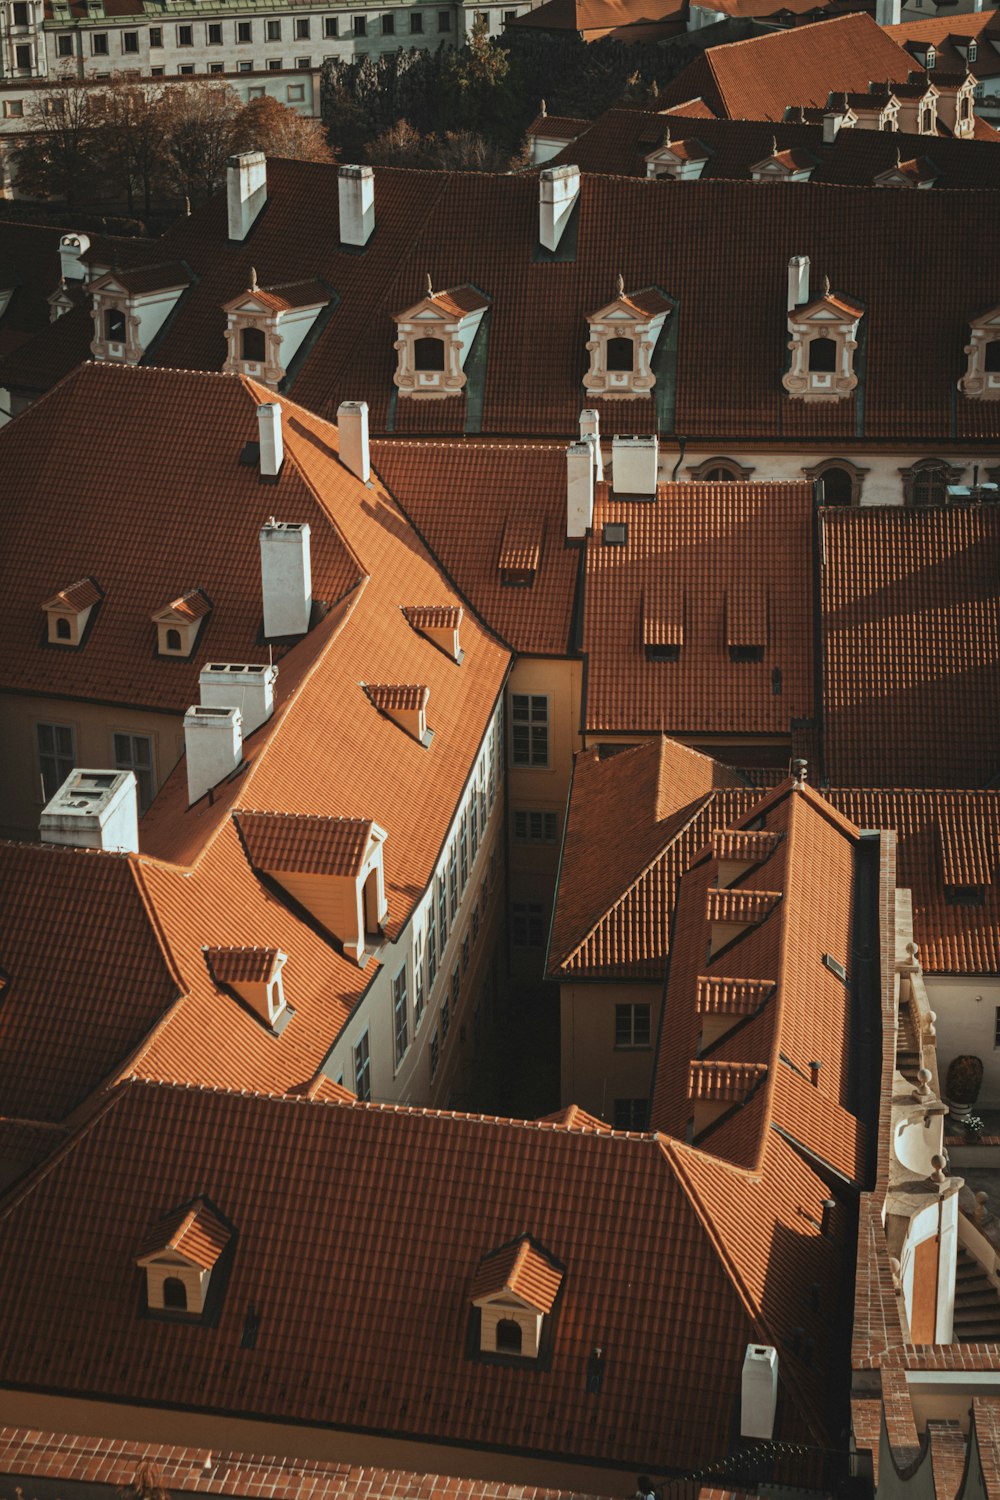 an aerial view of rooftops and buildings in a city